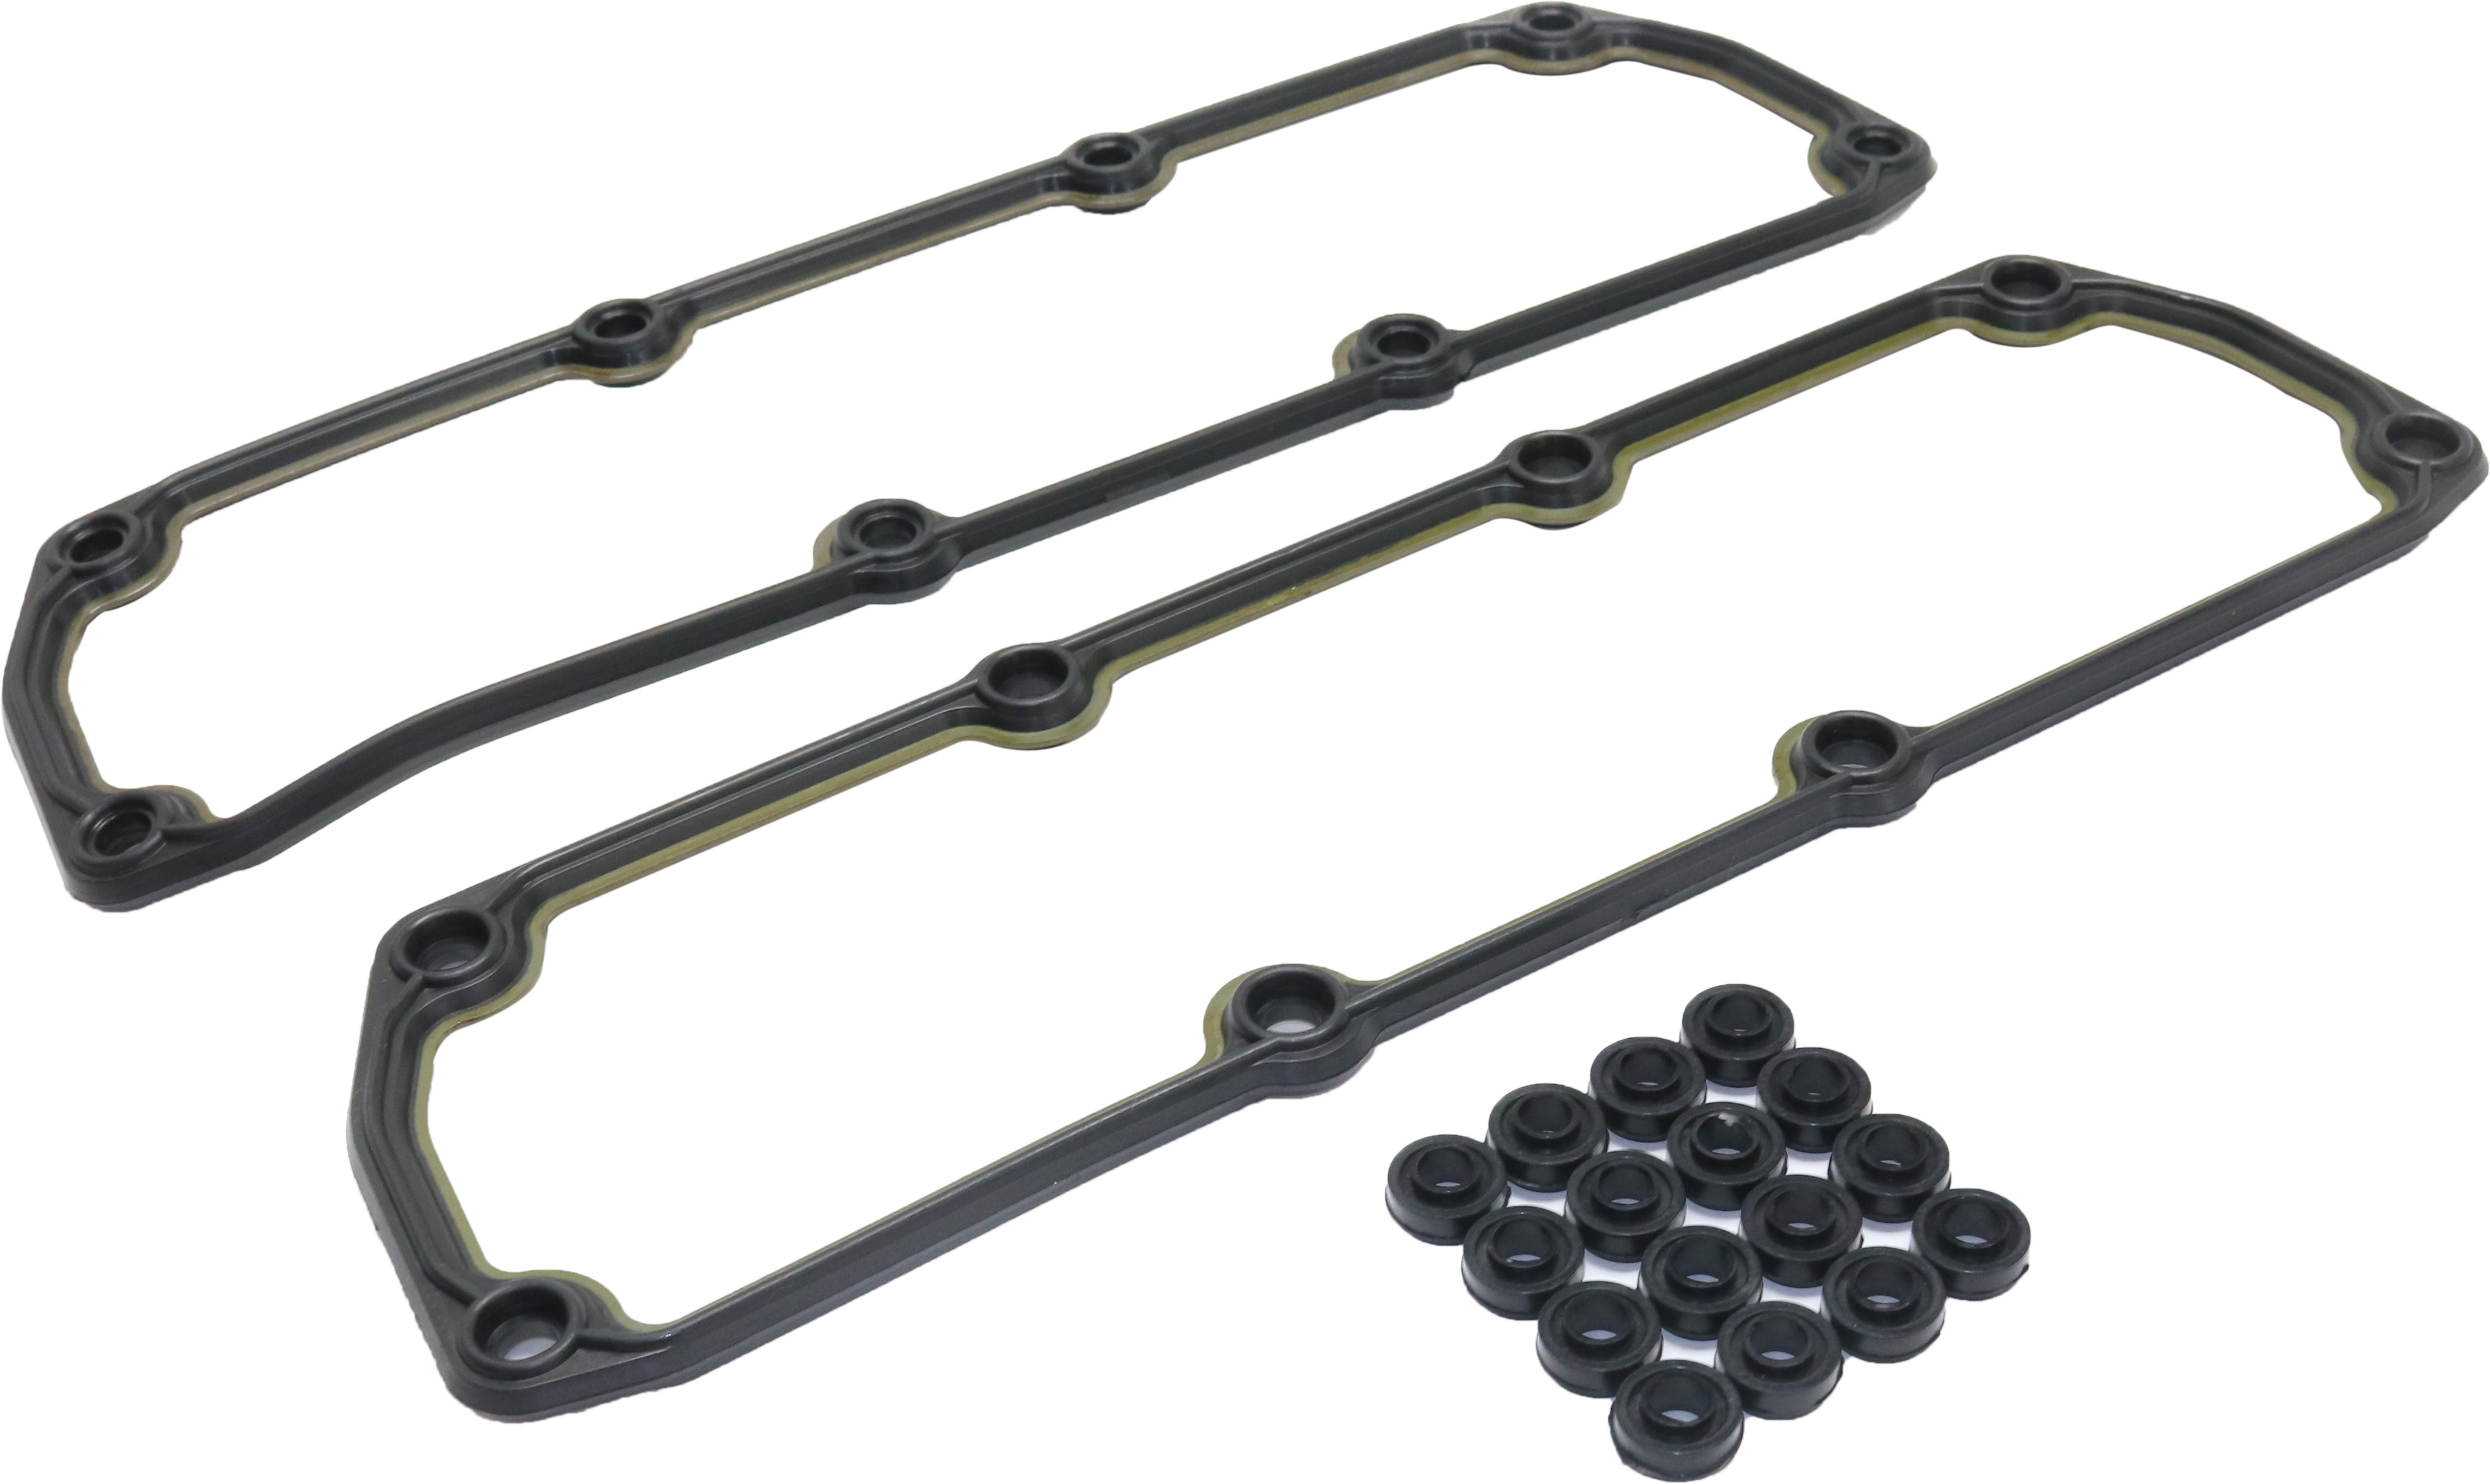 Valve Cover Gasket Compatible with 2001-2004 Dodge Grand Caravan Chrysler  Town and Country 6Cyl 3.3L 3.8L